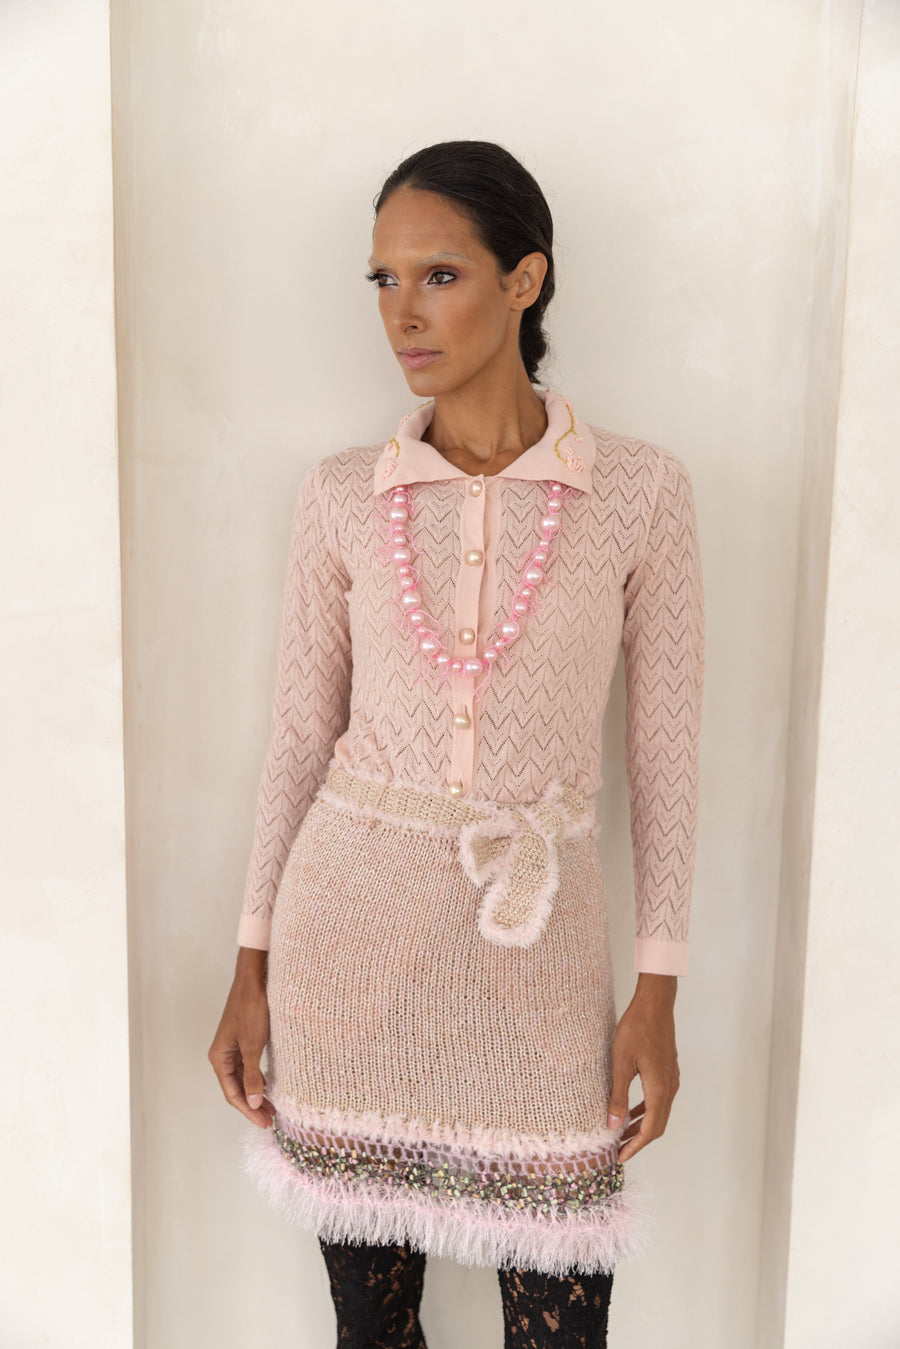 andreeva pink cashmere knit shirt